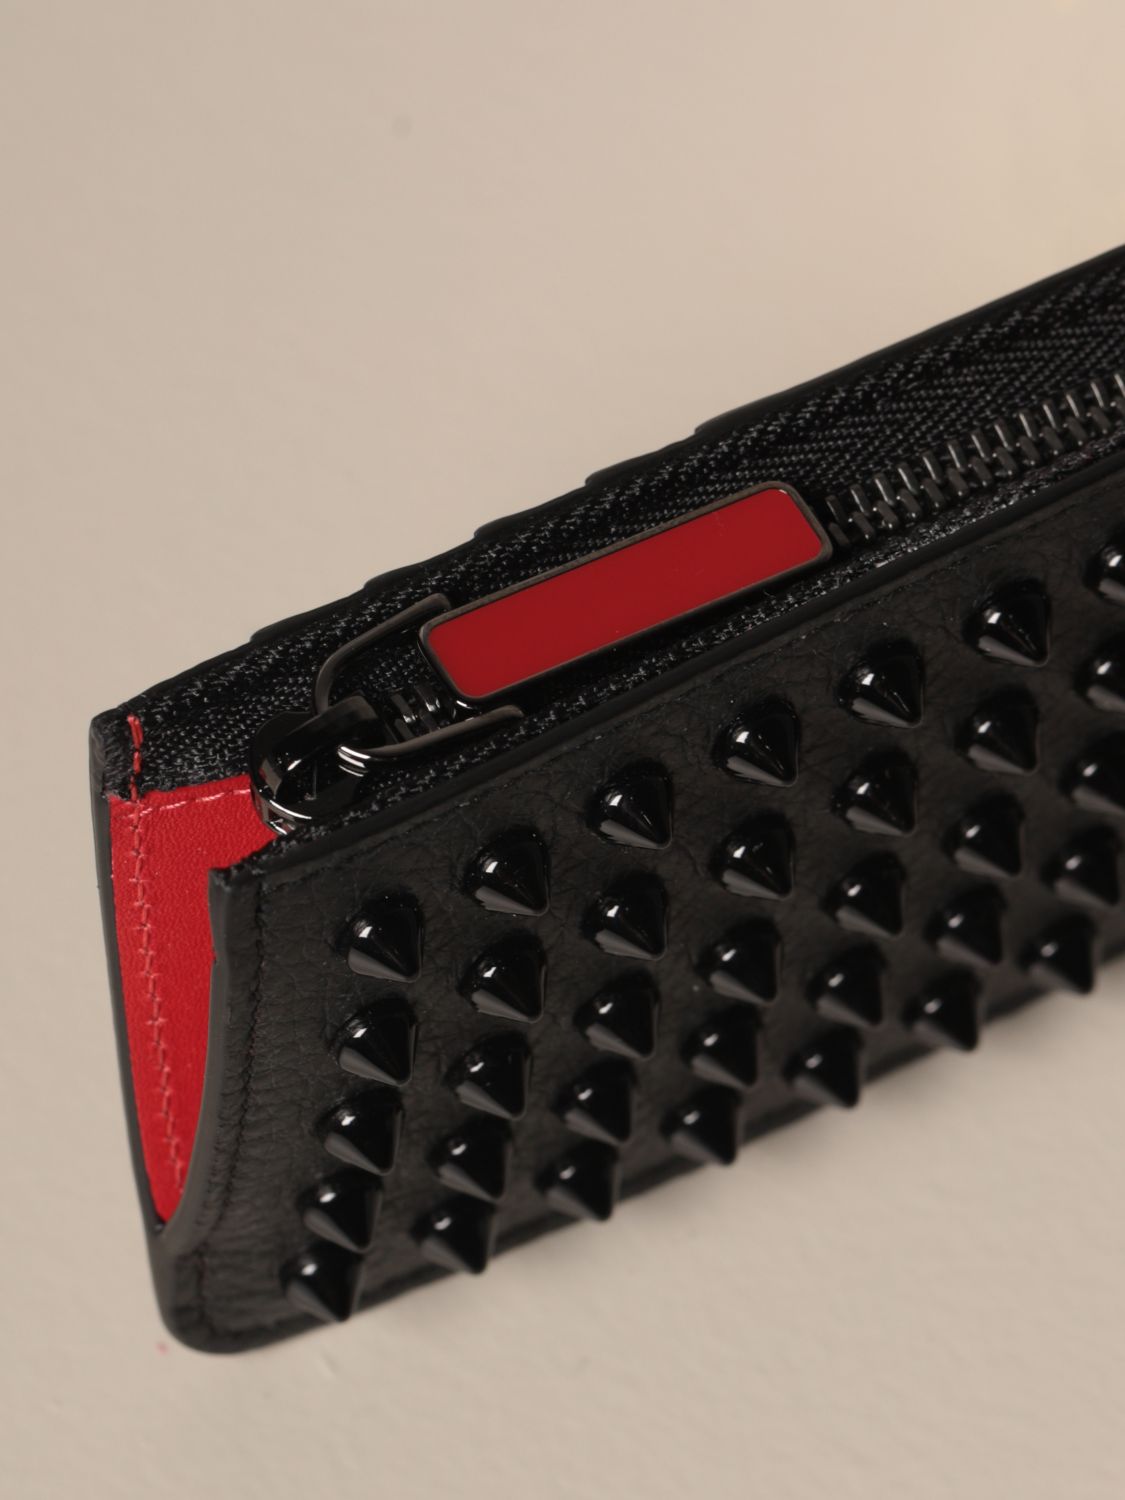 CHRISTIAN LOUBOUTIN: Credilou credit card holder in leather with studs | Christian Louboutin Men Black | Wallet Christian Louboutin 1205017 GIGLIO.COM